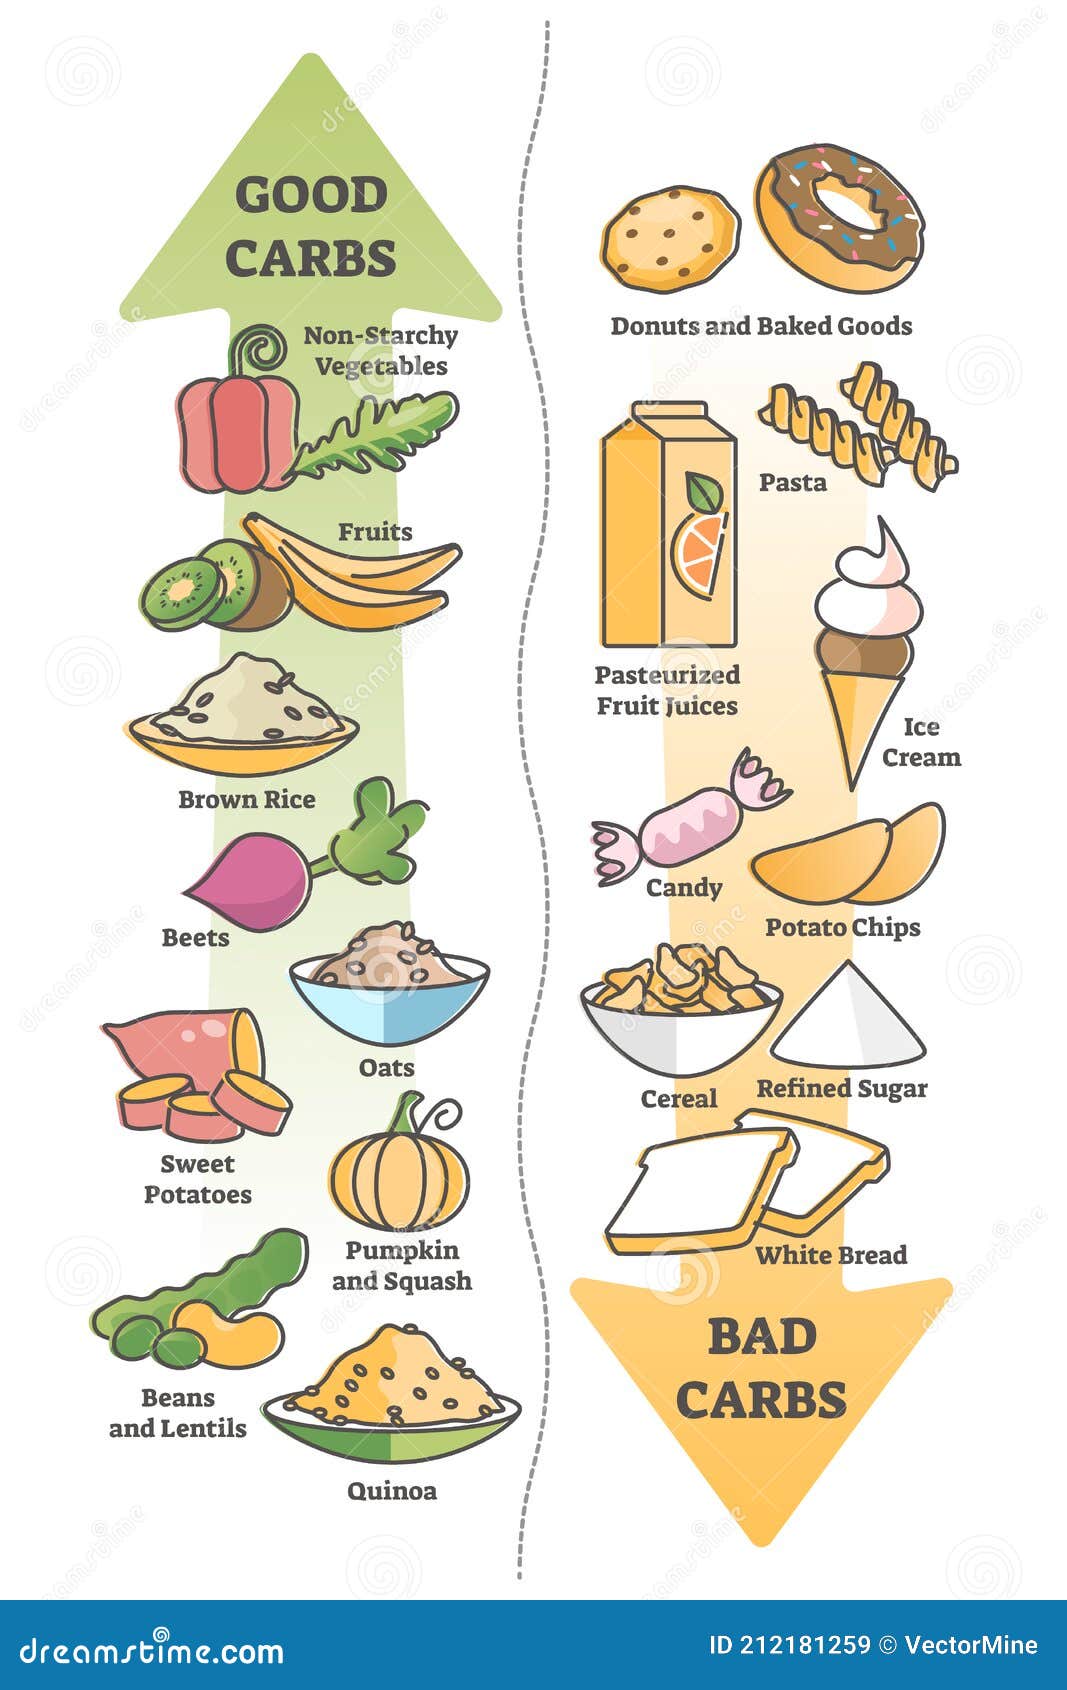 good carbohydrates vs bad carbs as food example educational outline diagram